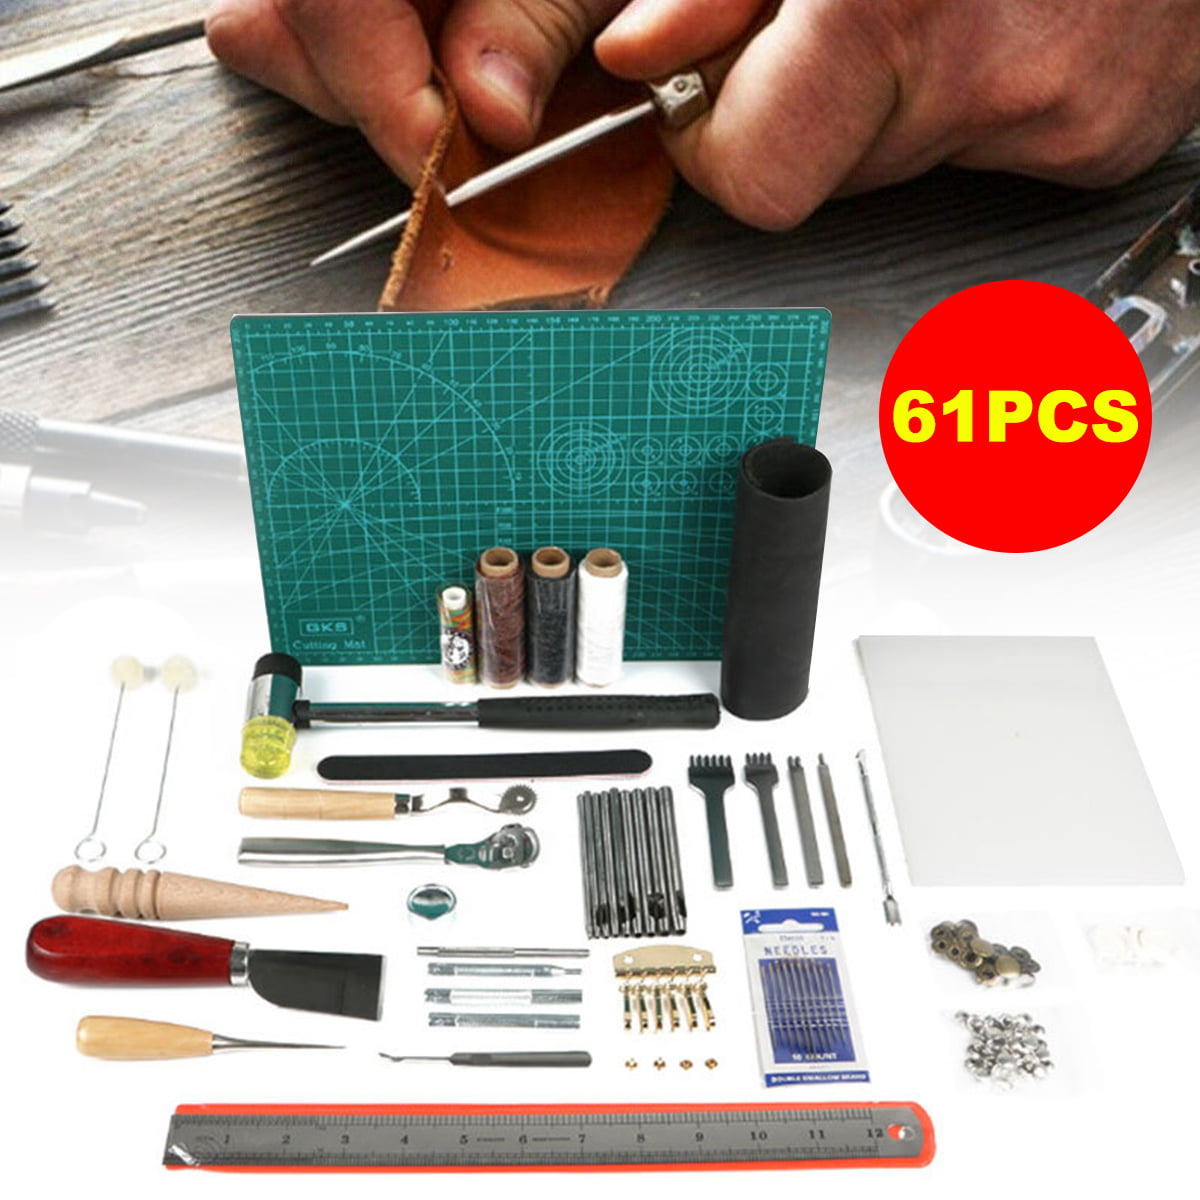 31 Pcs Leather Sewing Tools DIY Leather Craft Tools Hand Stitching Tool Set